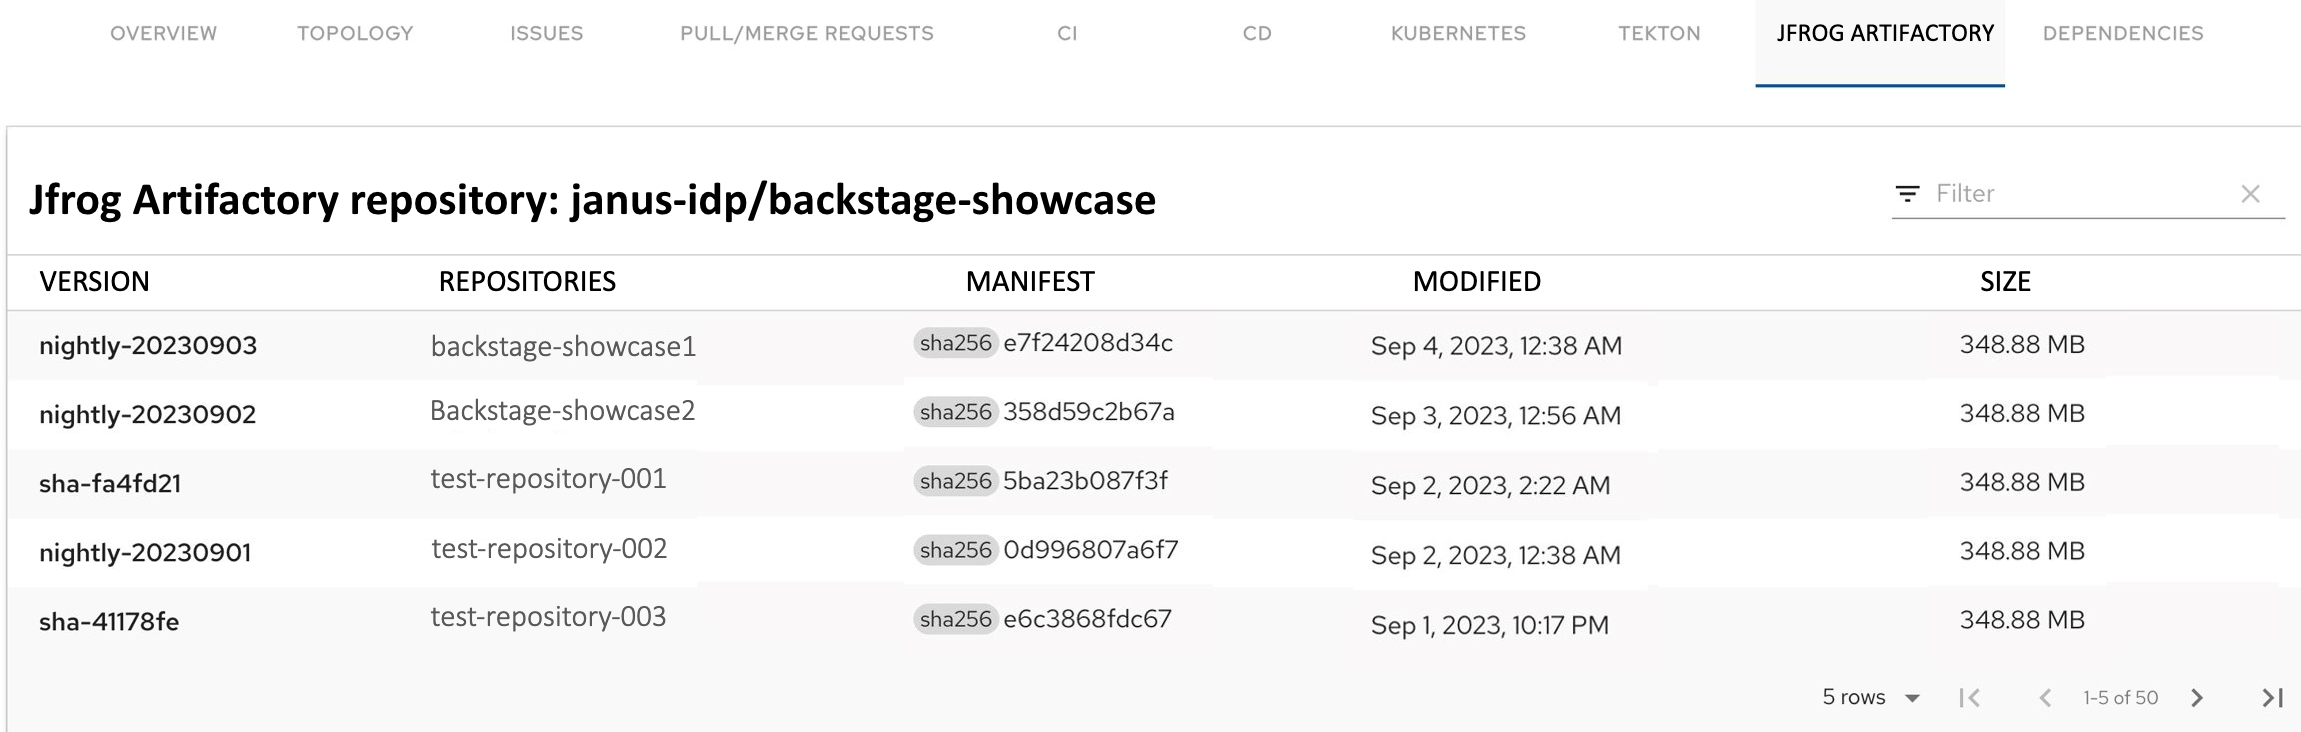 A list of all versions in a JFrog Artifactory repository named "janus-idp/backstage-showcase".